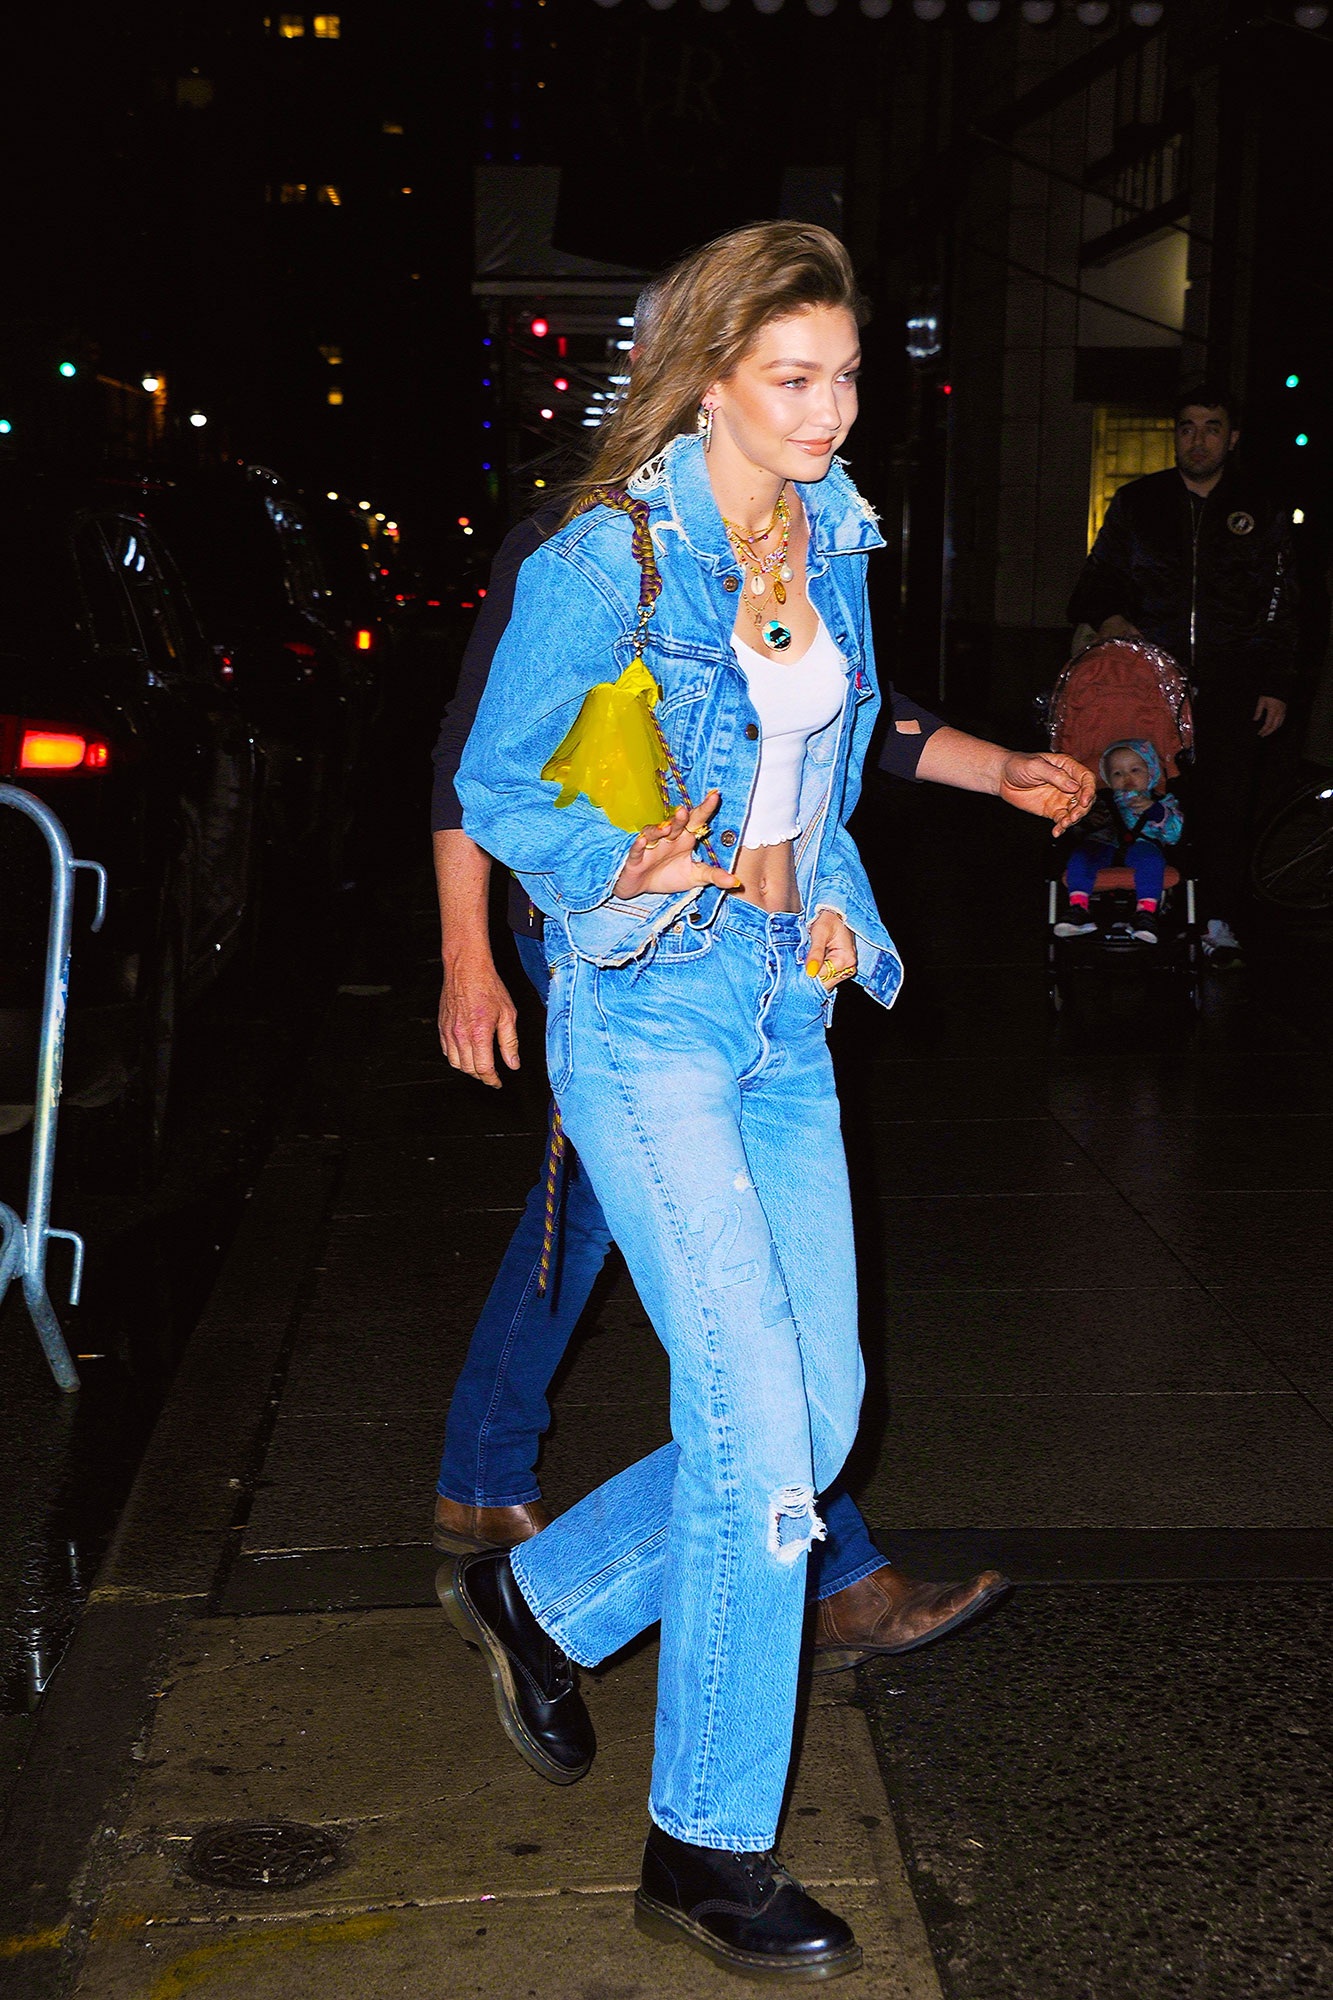 Discover 80+ denim party outfit best